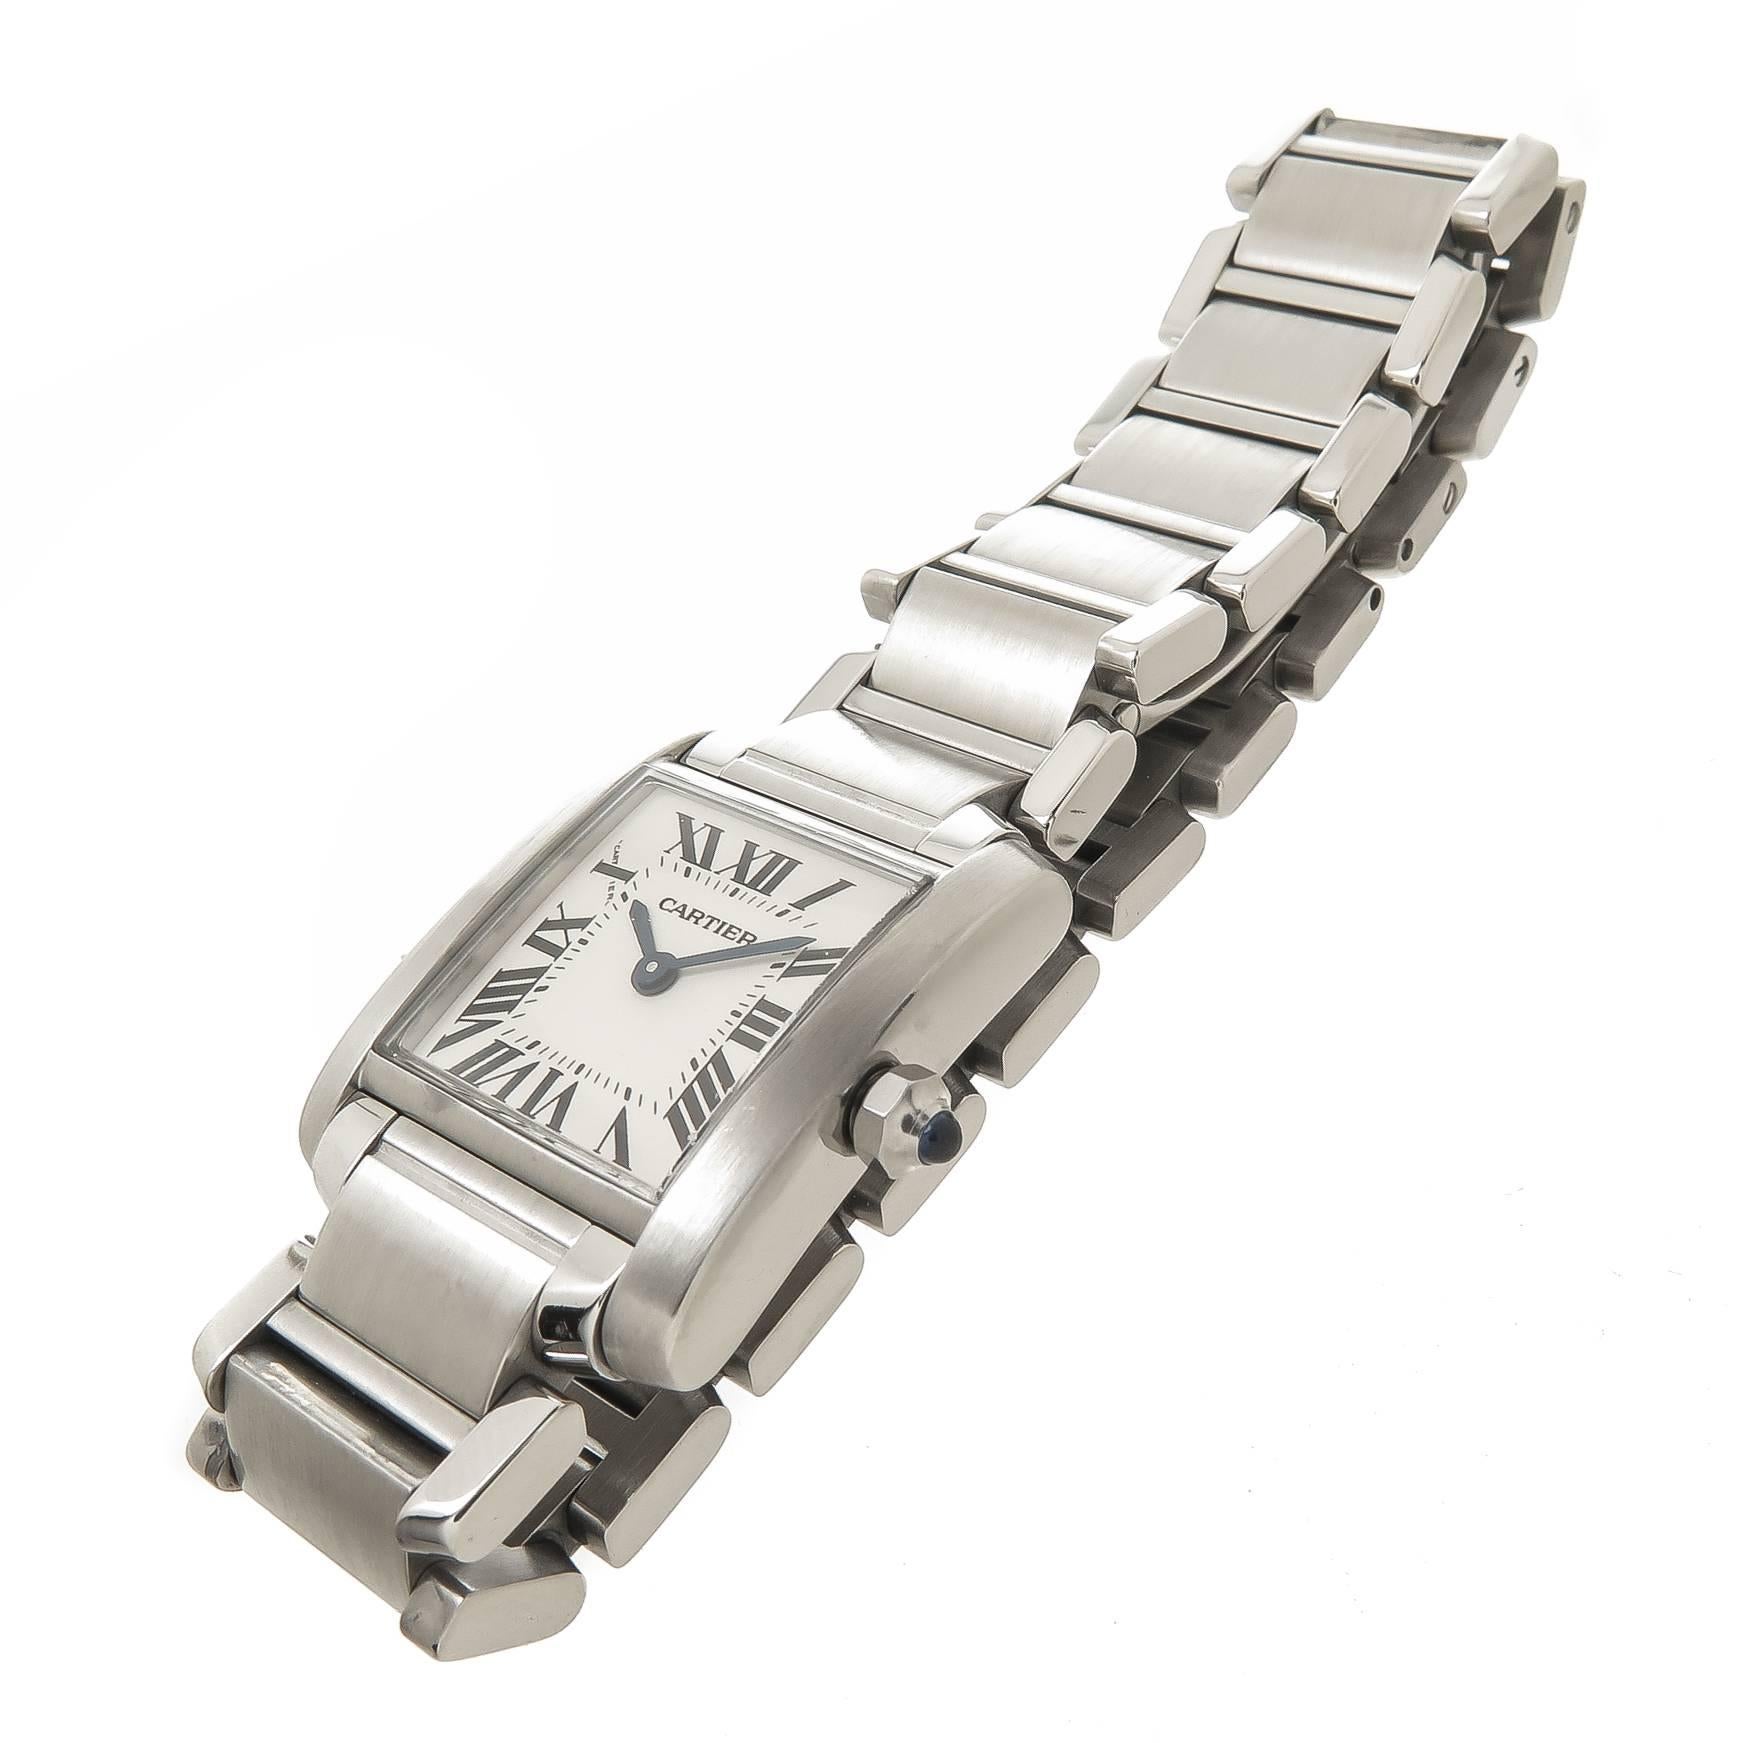 Circa 2015 Cartier Tank Francaise Collection Ladies Wrist Watch, 24 X 20 MM Water Resistant Case, Quartz Movement, White Dial with Black Roman Numerals, Sapphire Crown. 9/16 inch wide Steel Bracelet with Deployment clasp, watch length 6 inches.